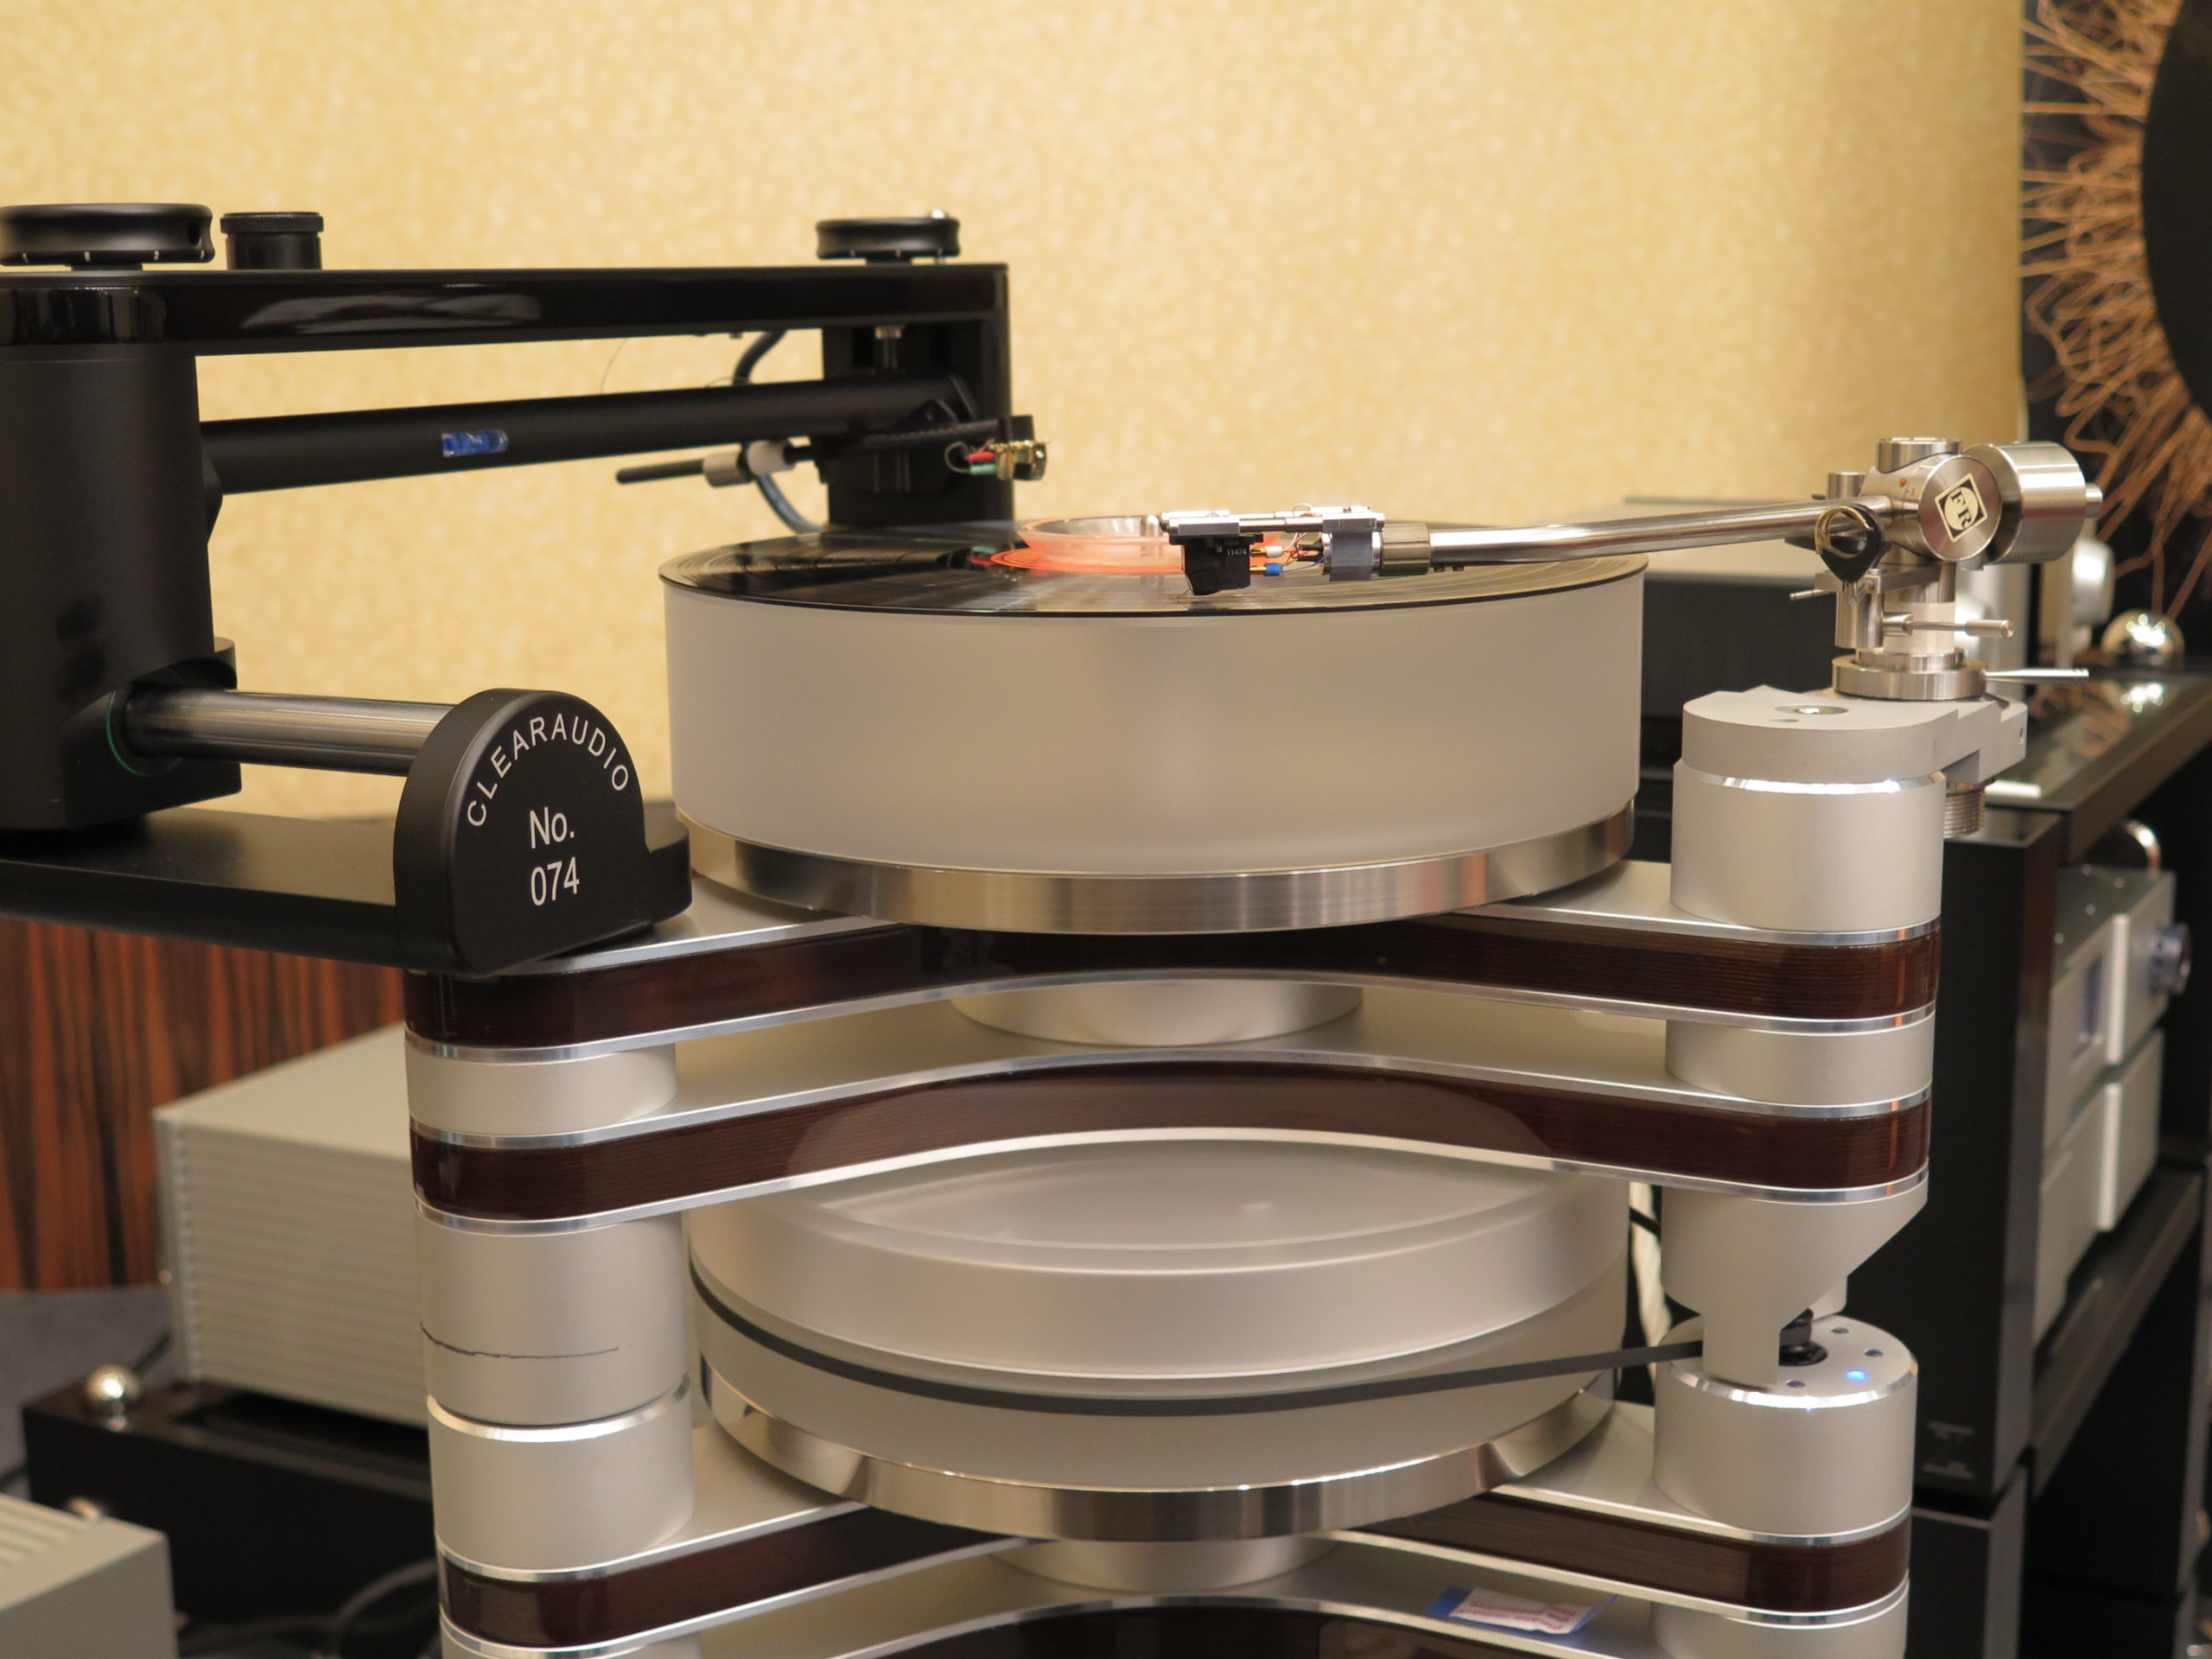 Clearaudio Master Innovation turntable with Statement TT1 tangential tonearm